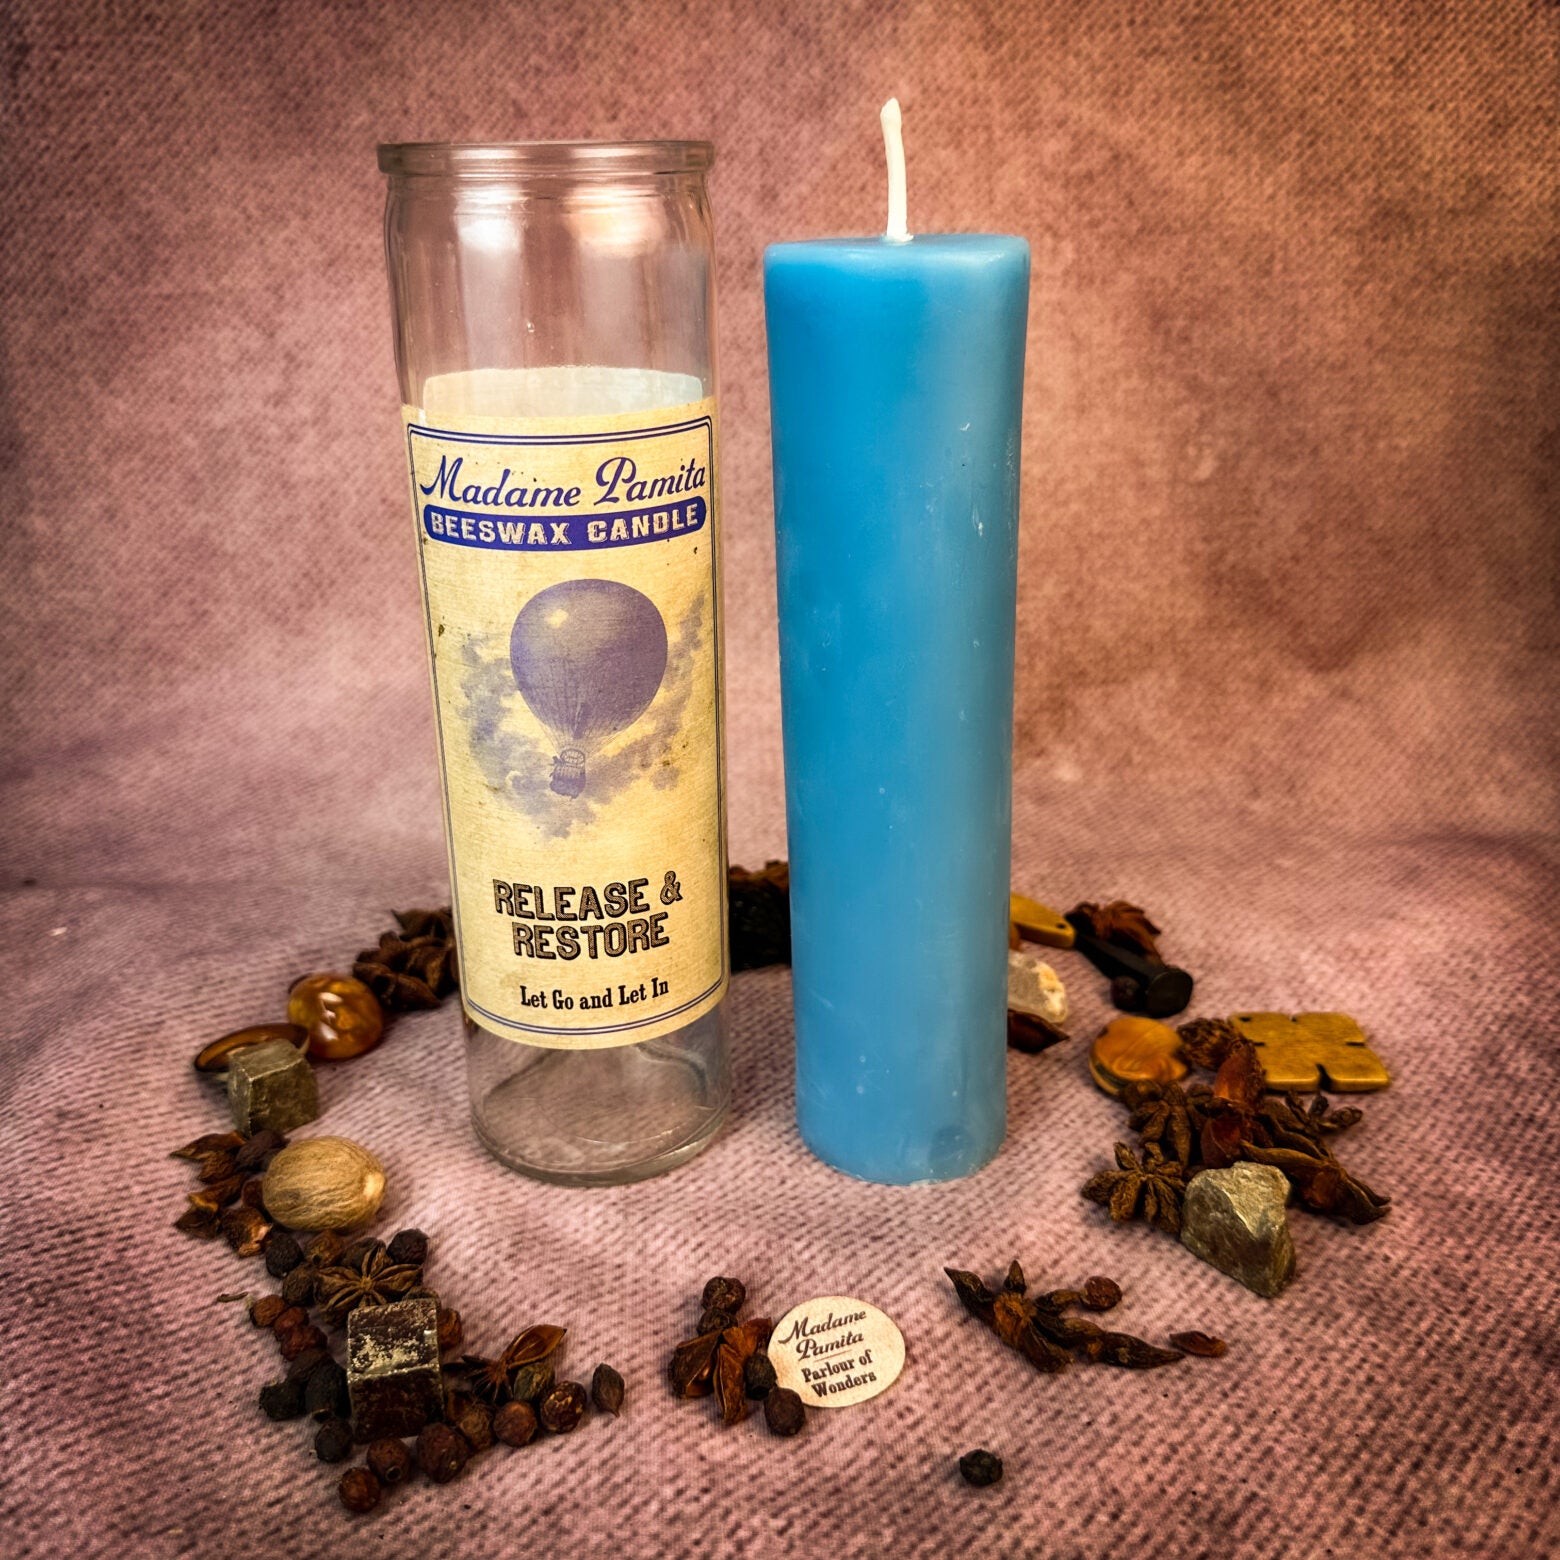 Madame Pamita Release and Restore Beeswax Vigil Candle